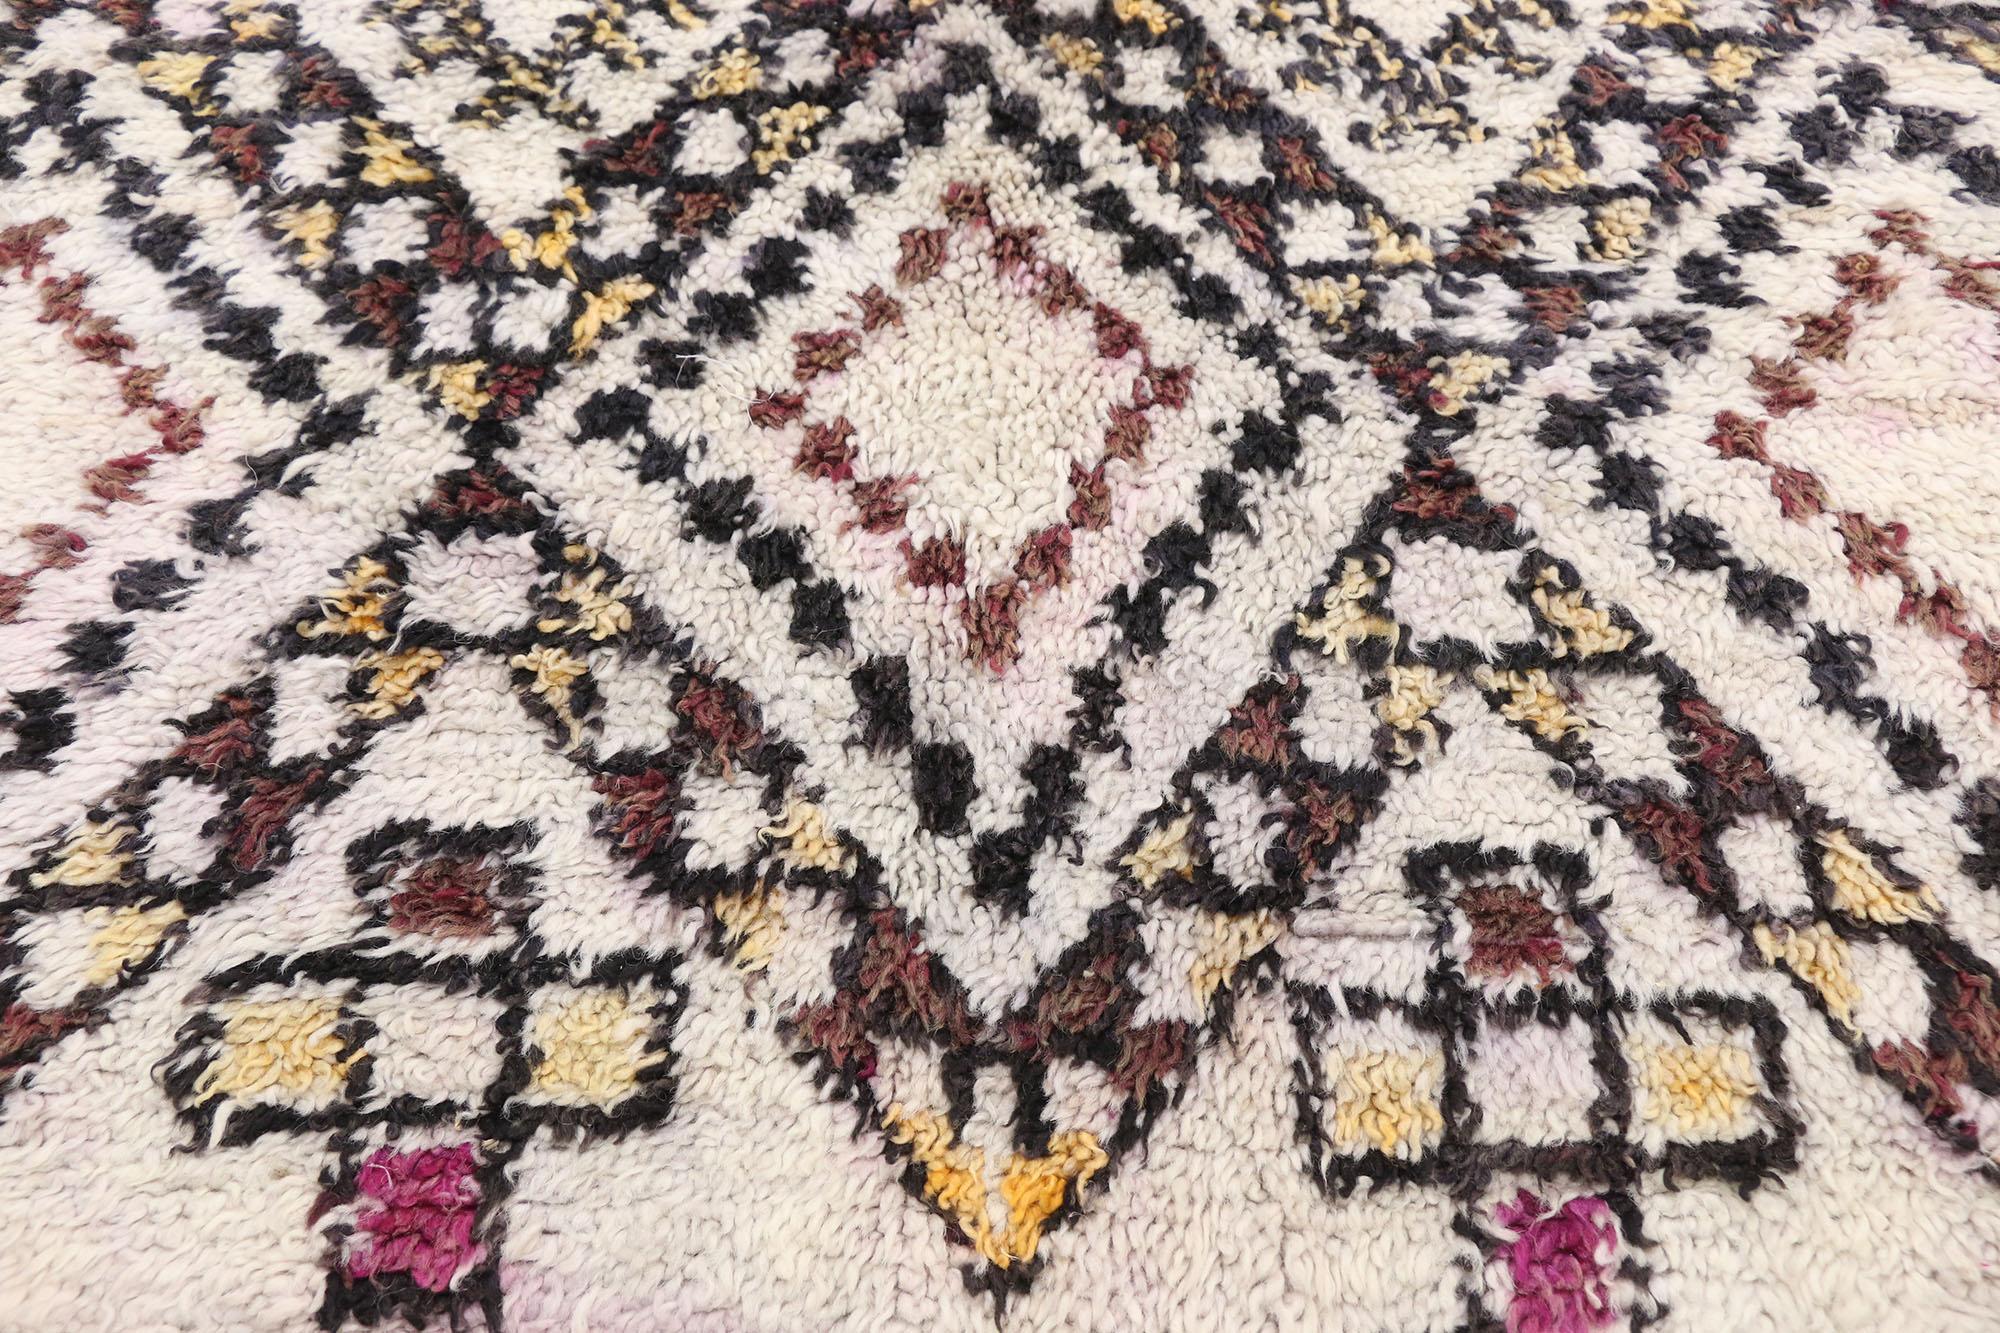 Vintage Moroccan Beni Ourain Rug, Midcentury Modern Meets Nomadic Charm In Good Condition For Sale In Dallas, TX